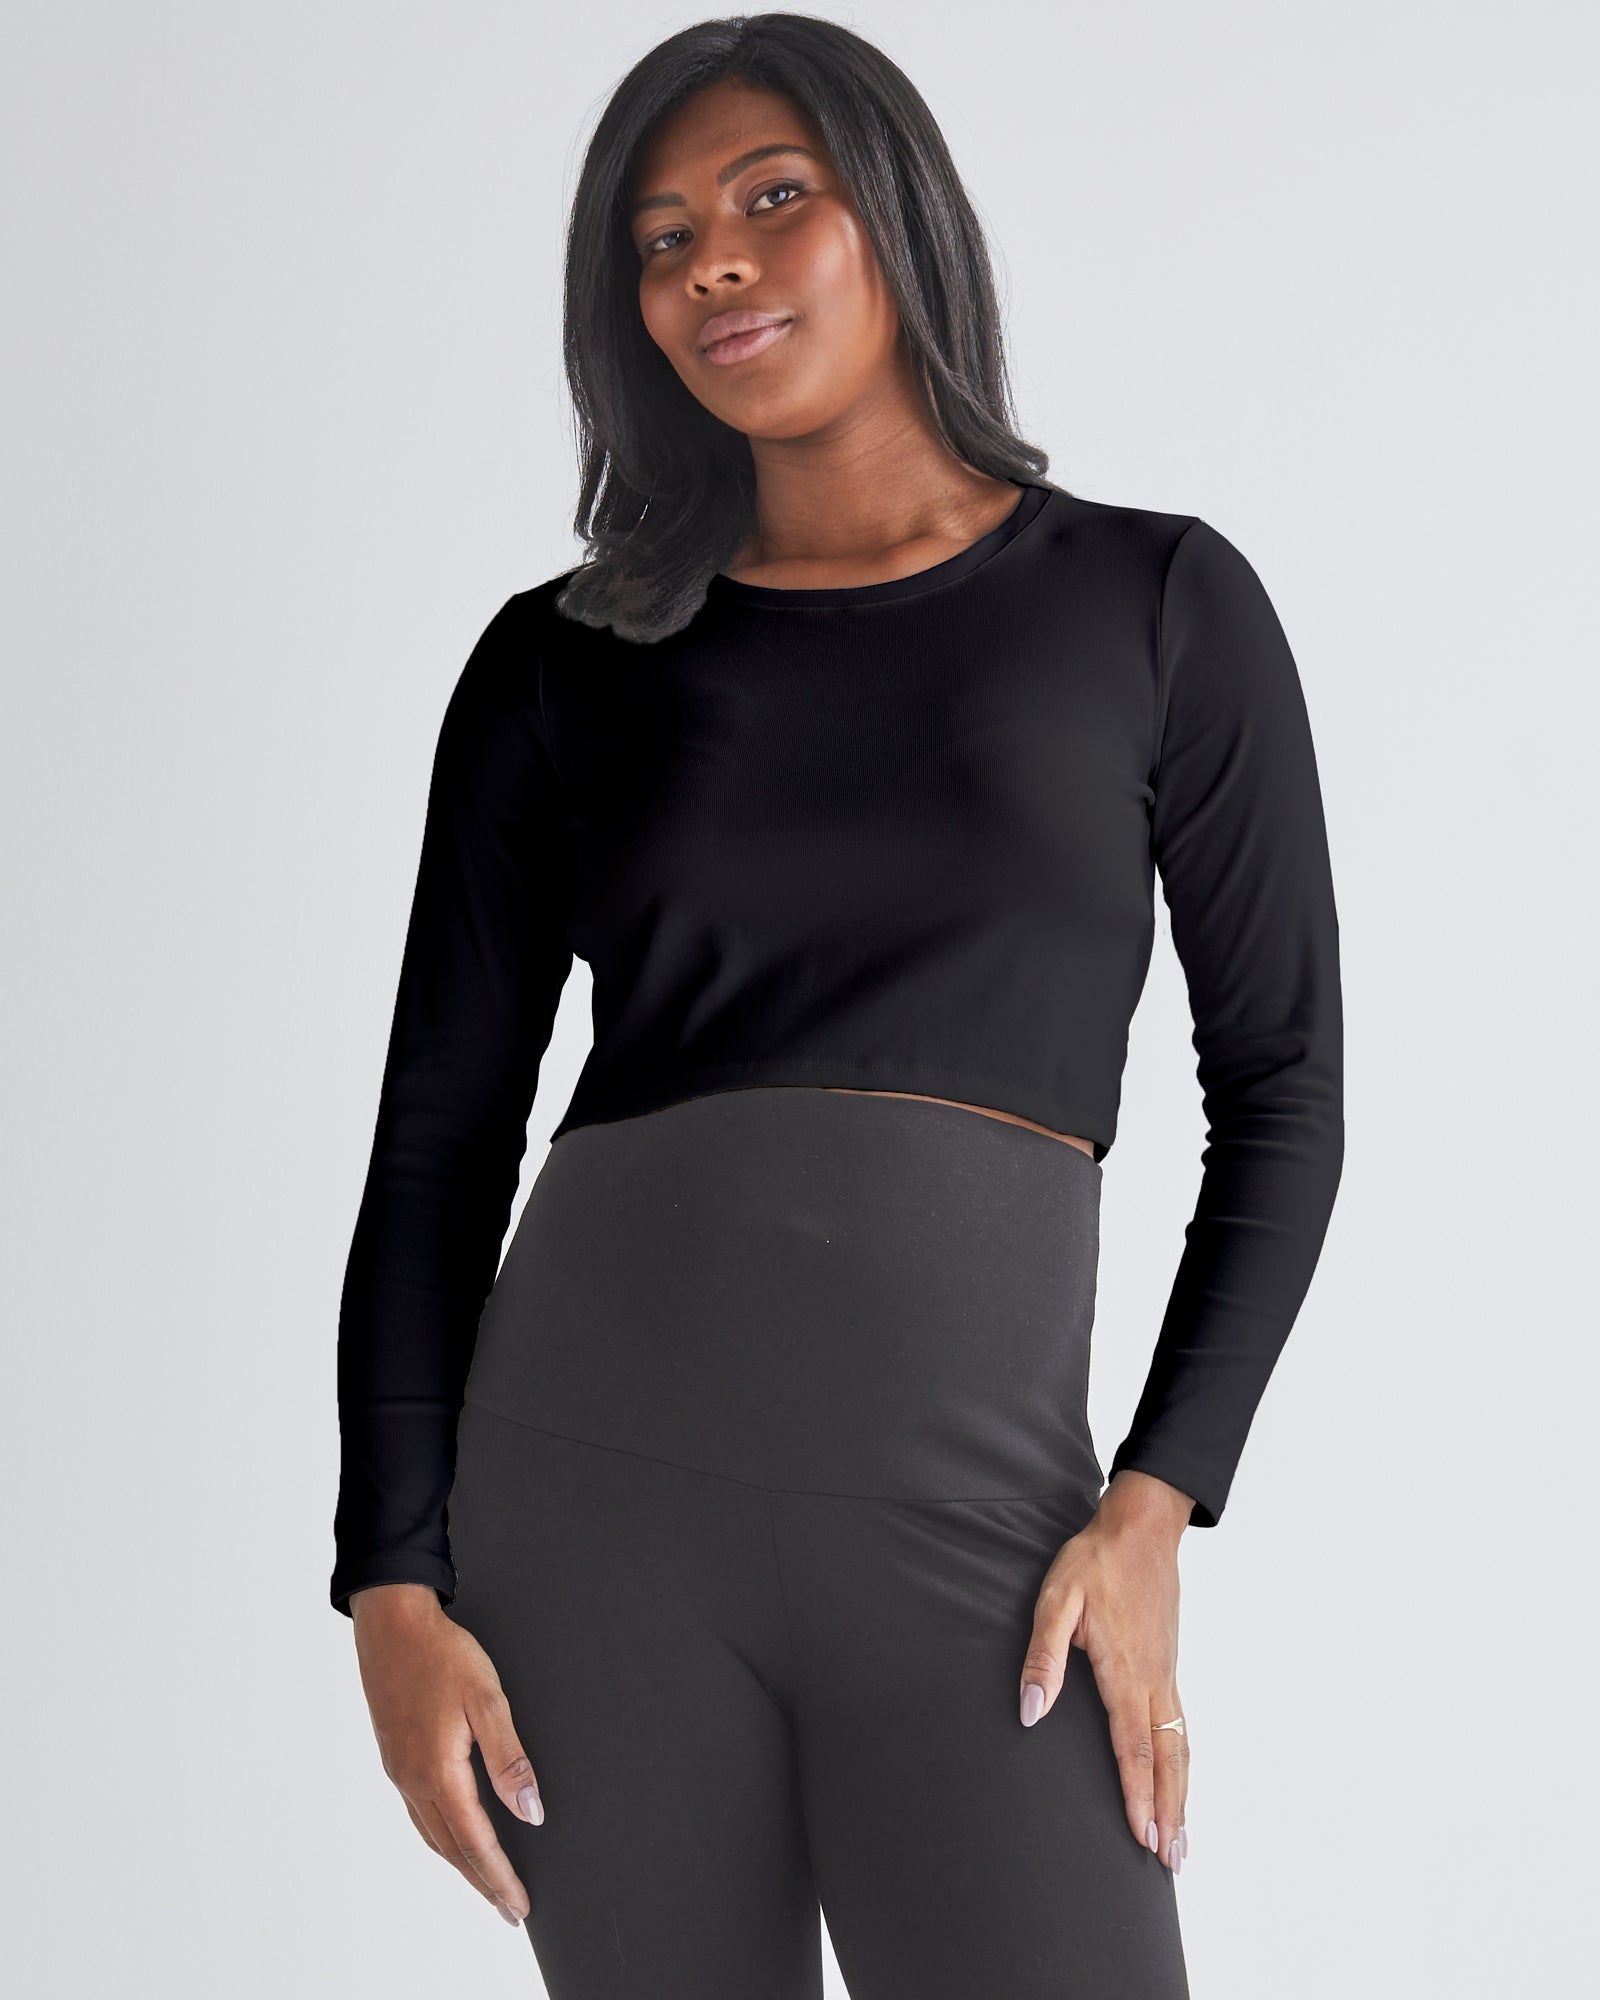 Front View - A Pregnant Woman Wearing Long Sleeve Cotton Black Maternity Crop Top from Angel Maternity